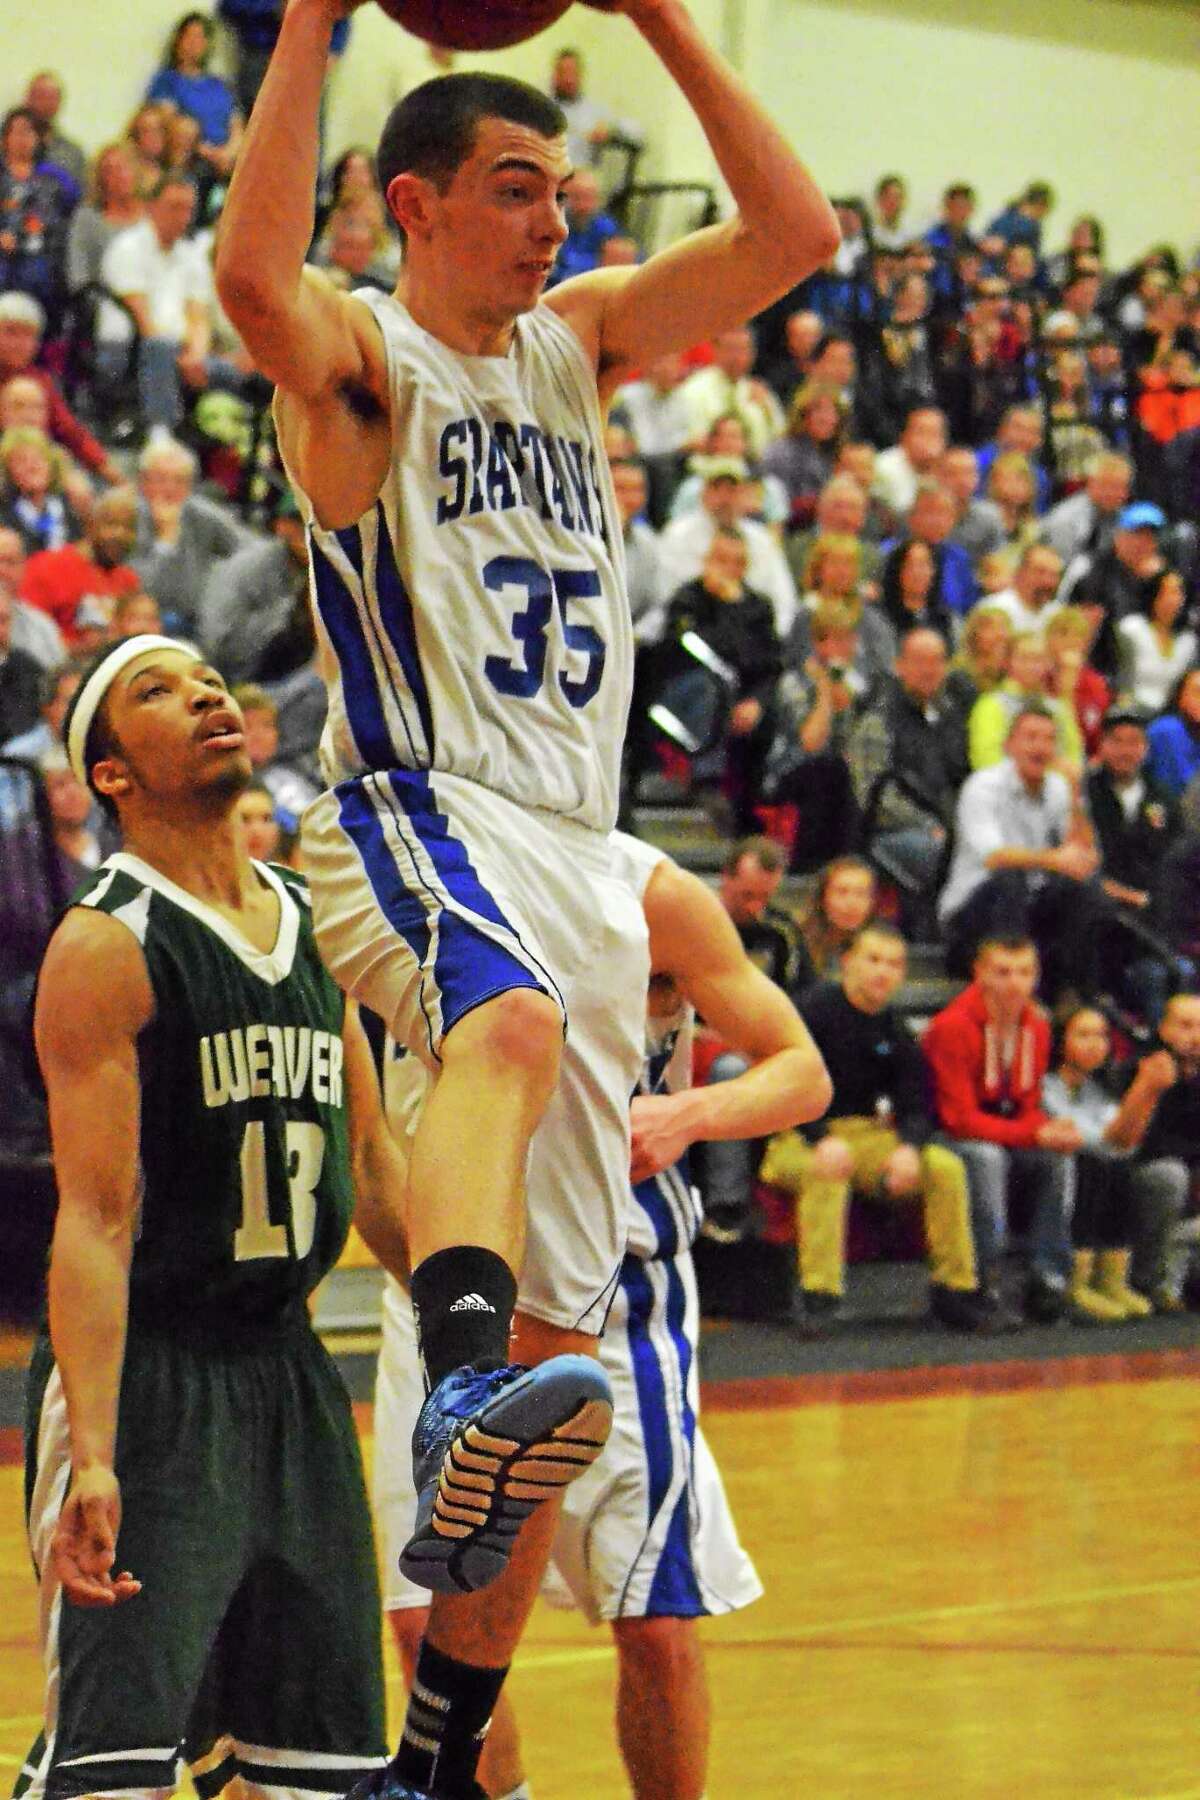 Lewis Mills’ Nate Cook grabs a rebound in the Spartans’ 89-33 loss to Weaver in the Class M semifinals.